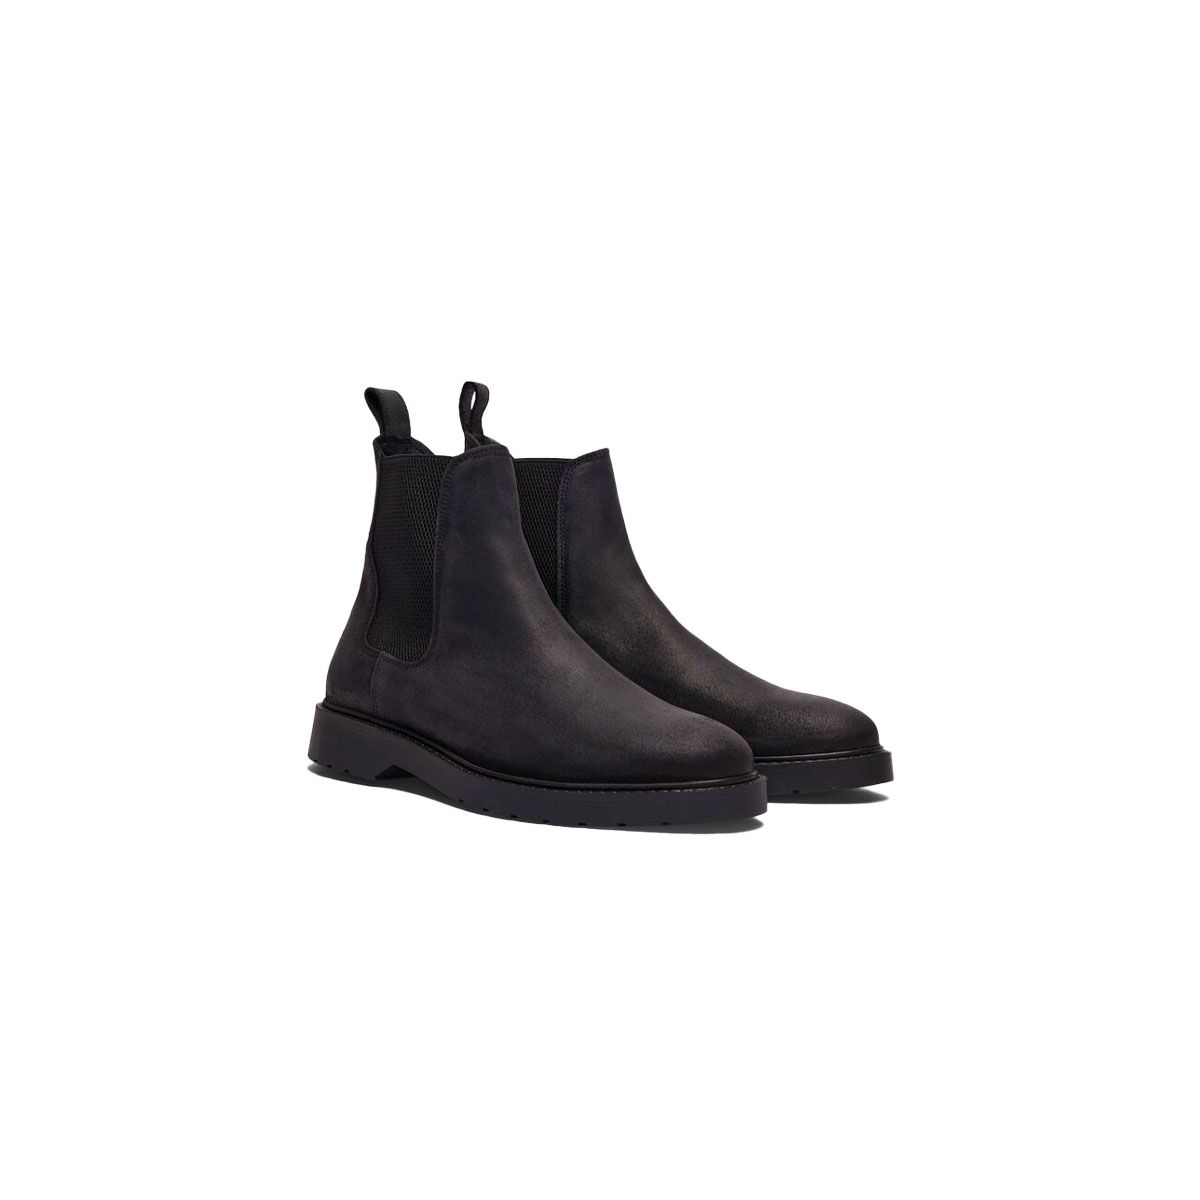 Chelsie Classic Leather Black Boots